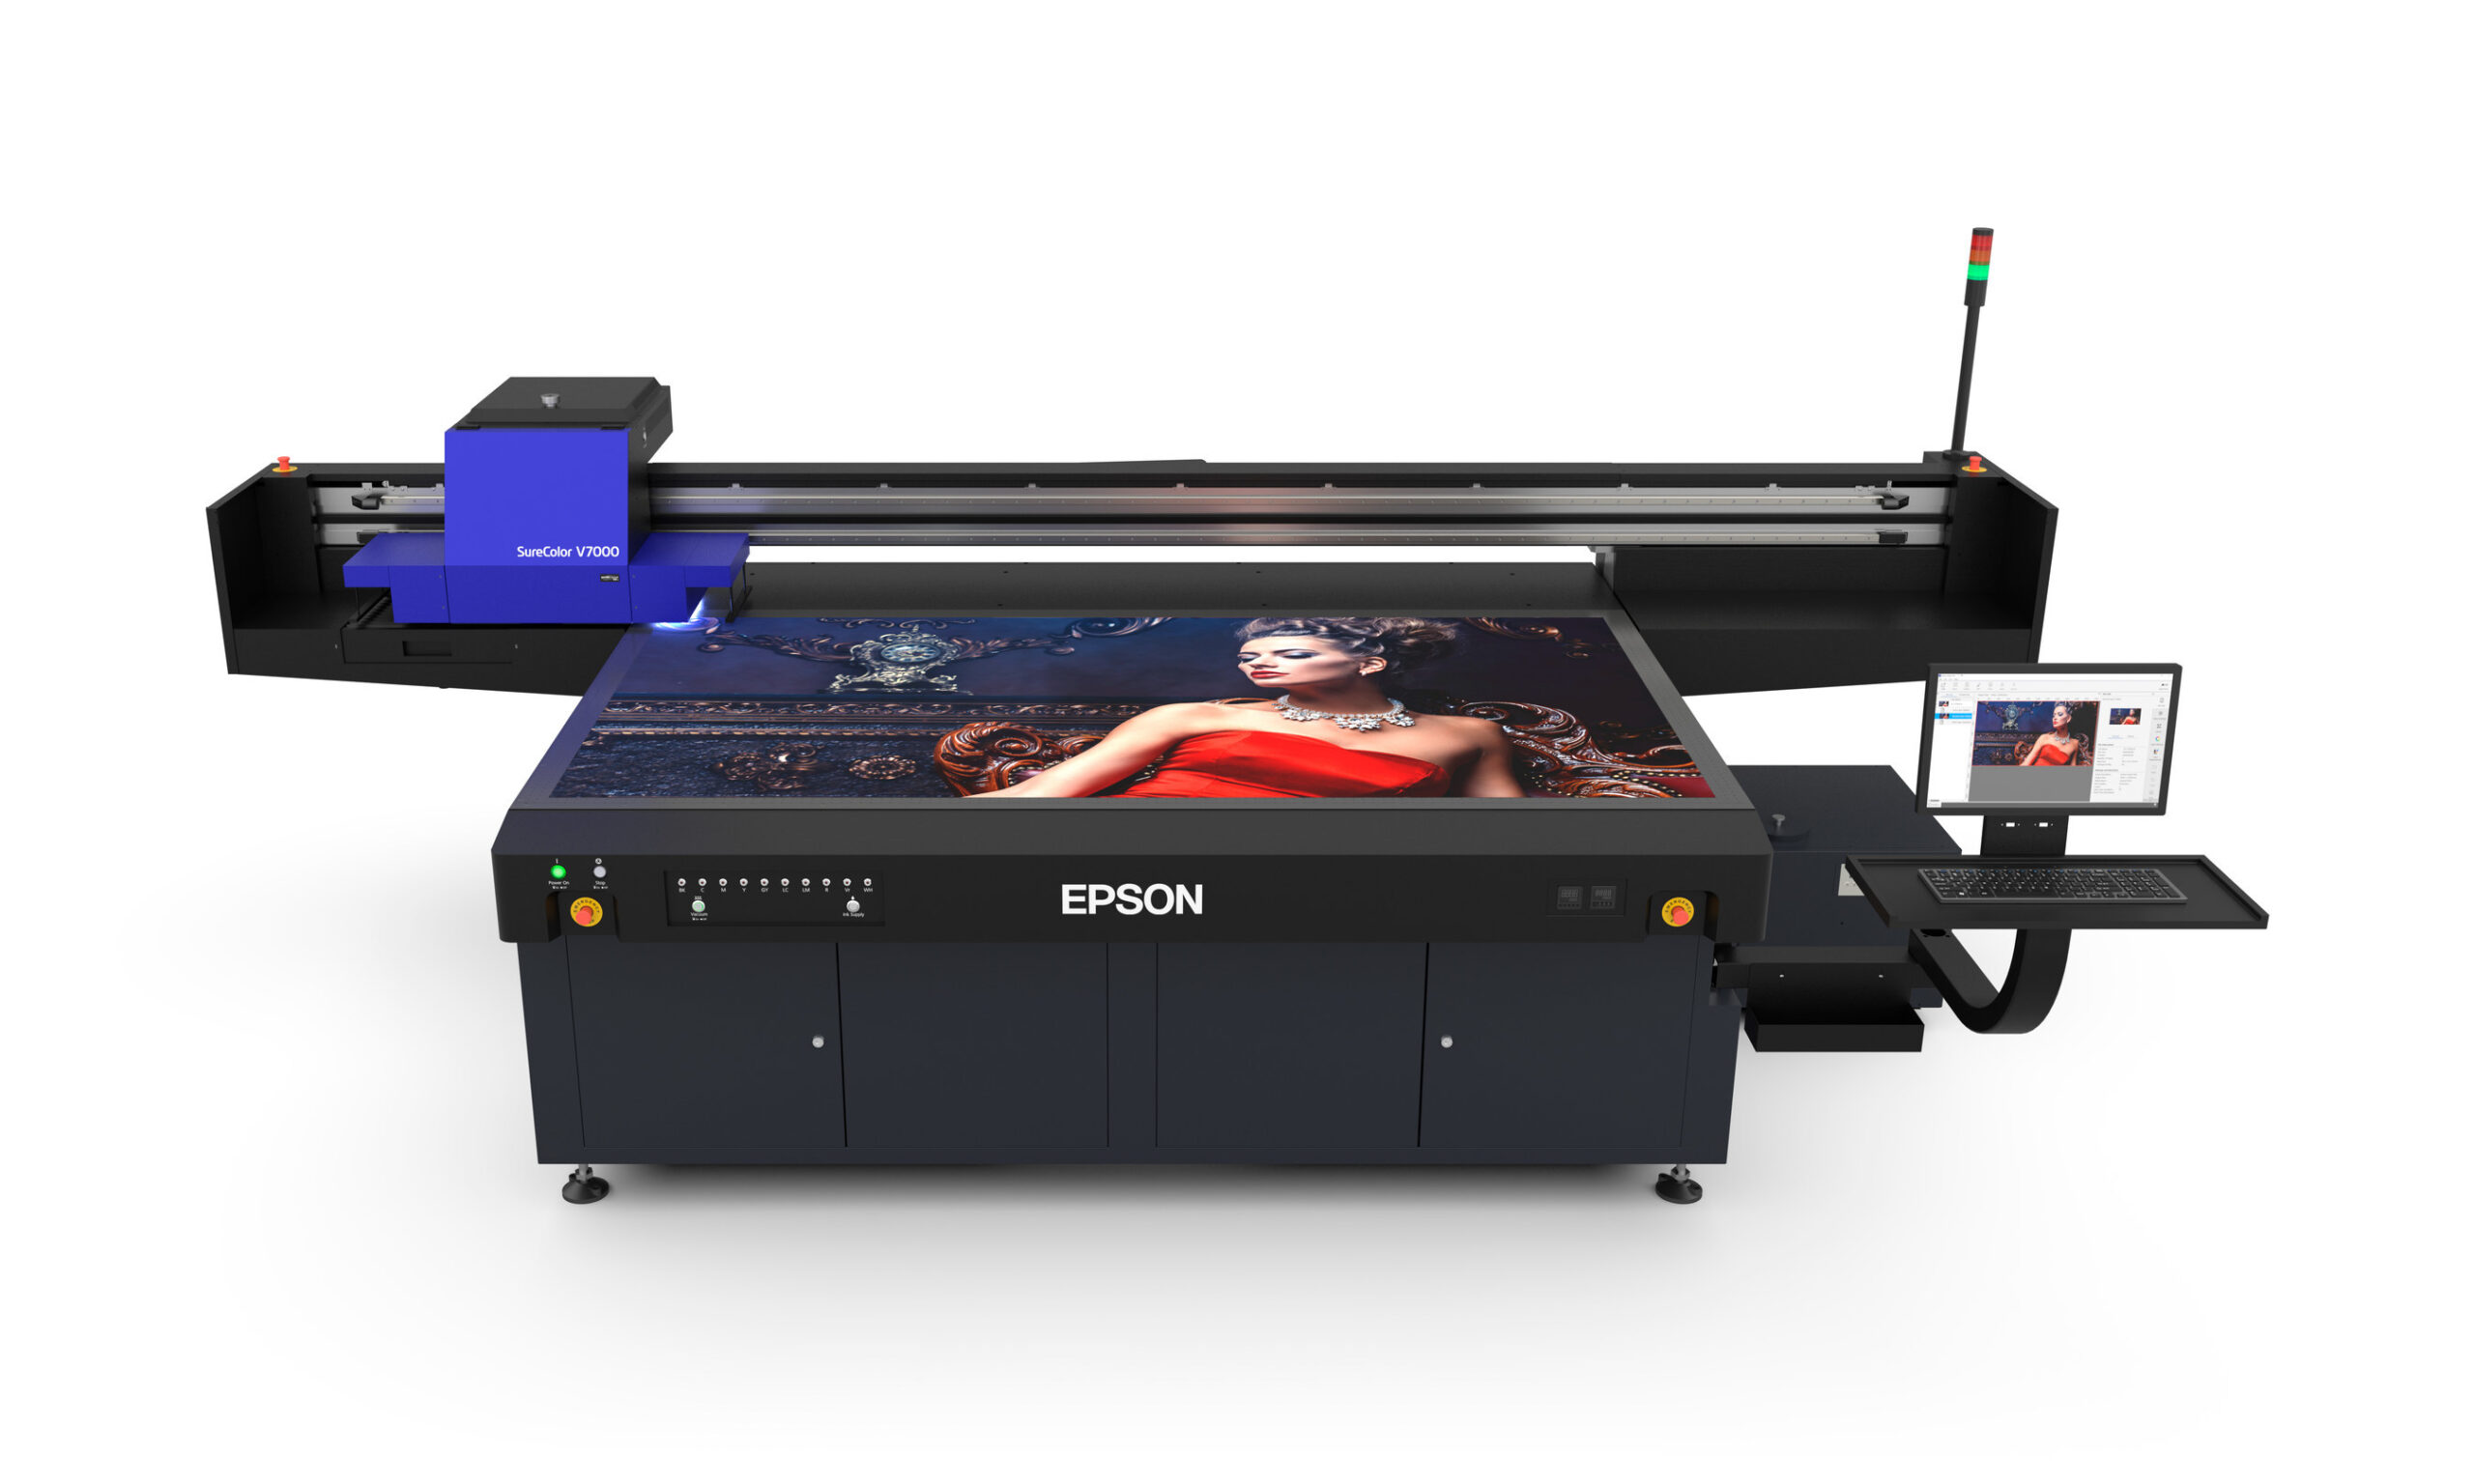 Epsons First Uv Flatbed Printer Offers Print Service Providers Outstanding Quality Outdoor 4285